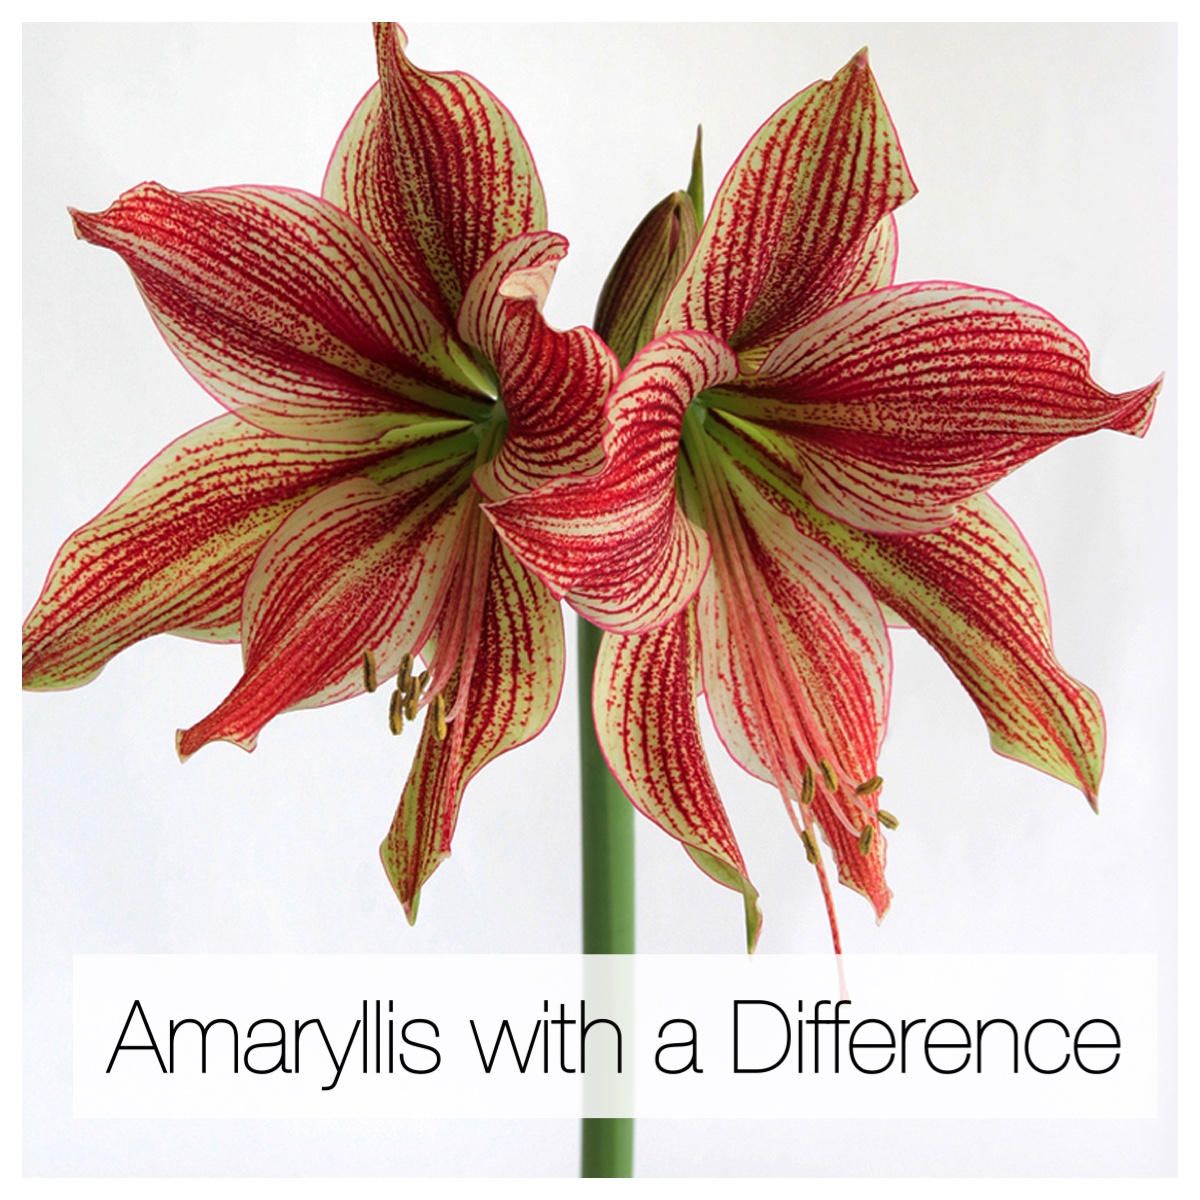 Amaryllis With a Difference: Unusual Colors and Flower Styles